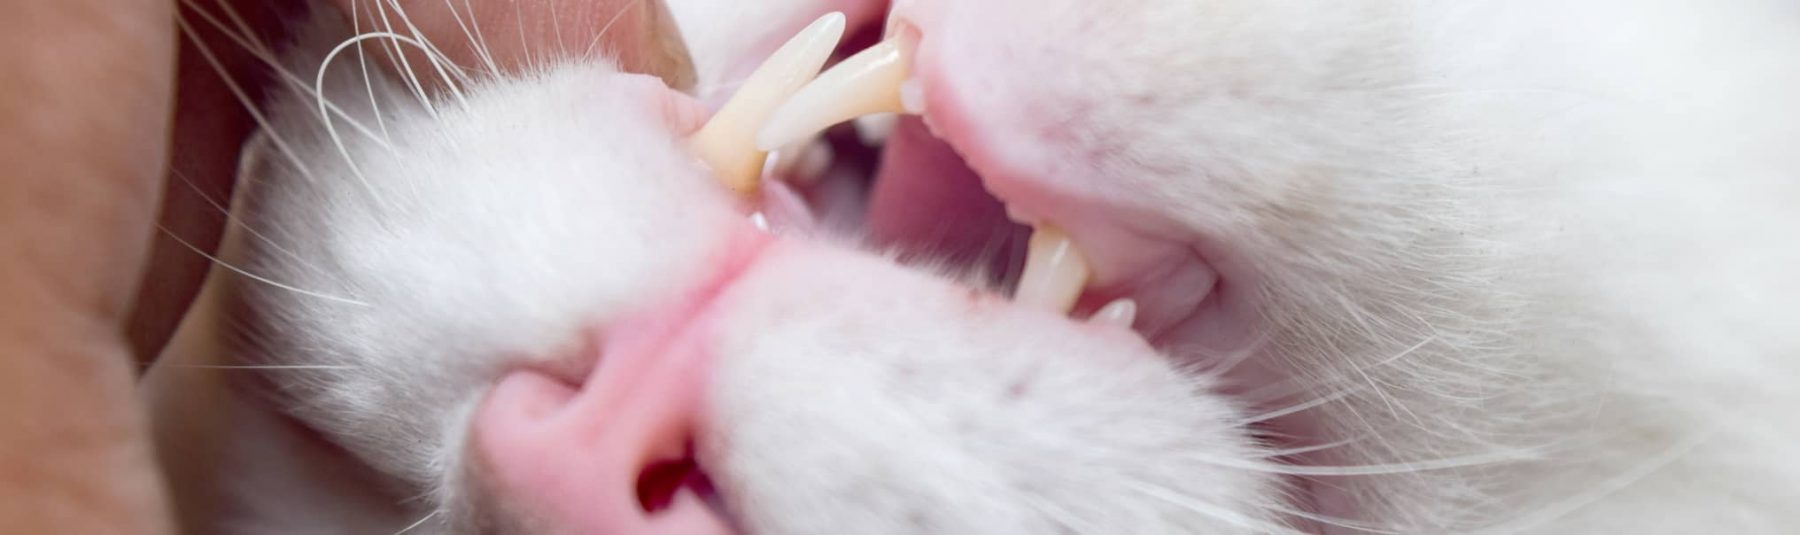 Upside down view of the mouth of a cat